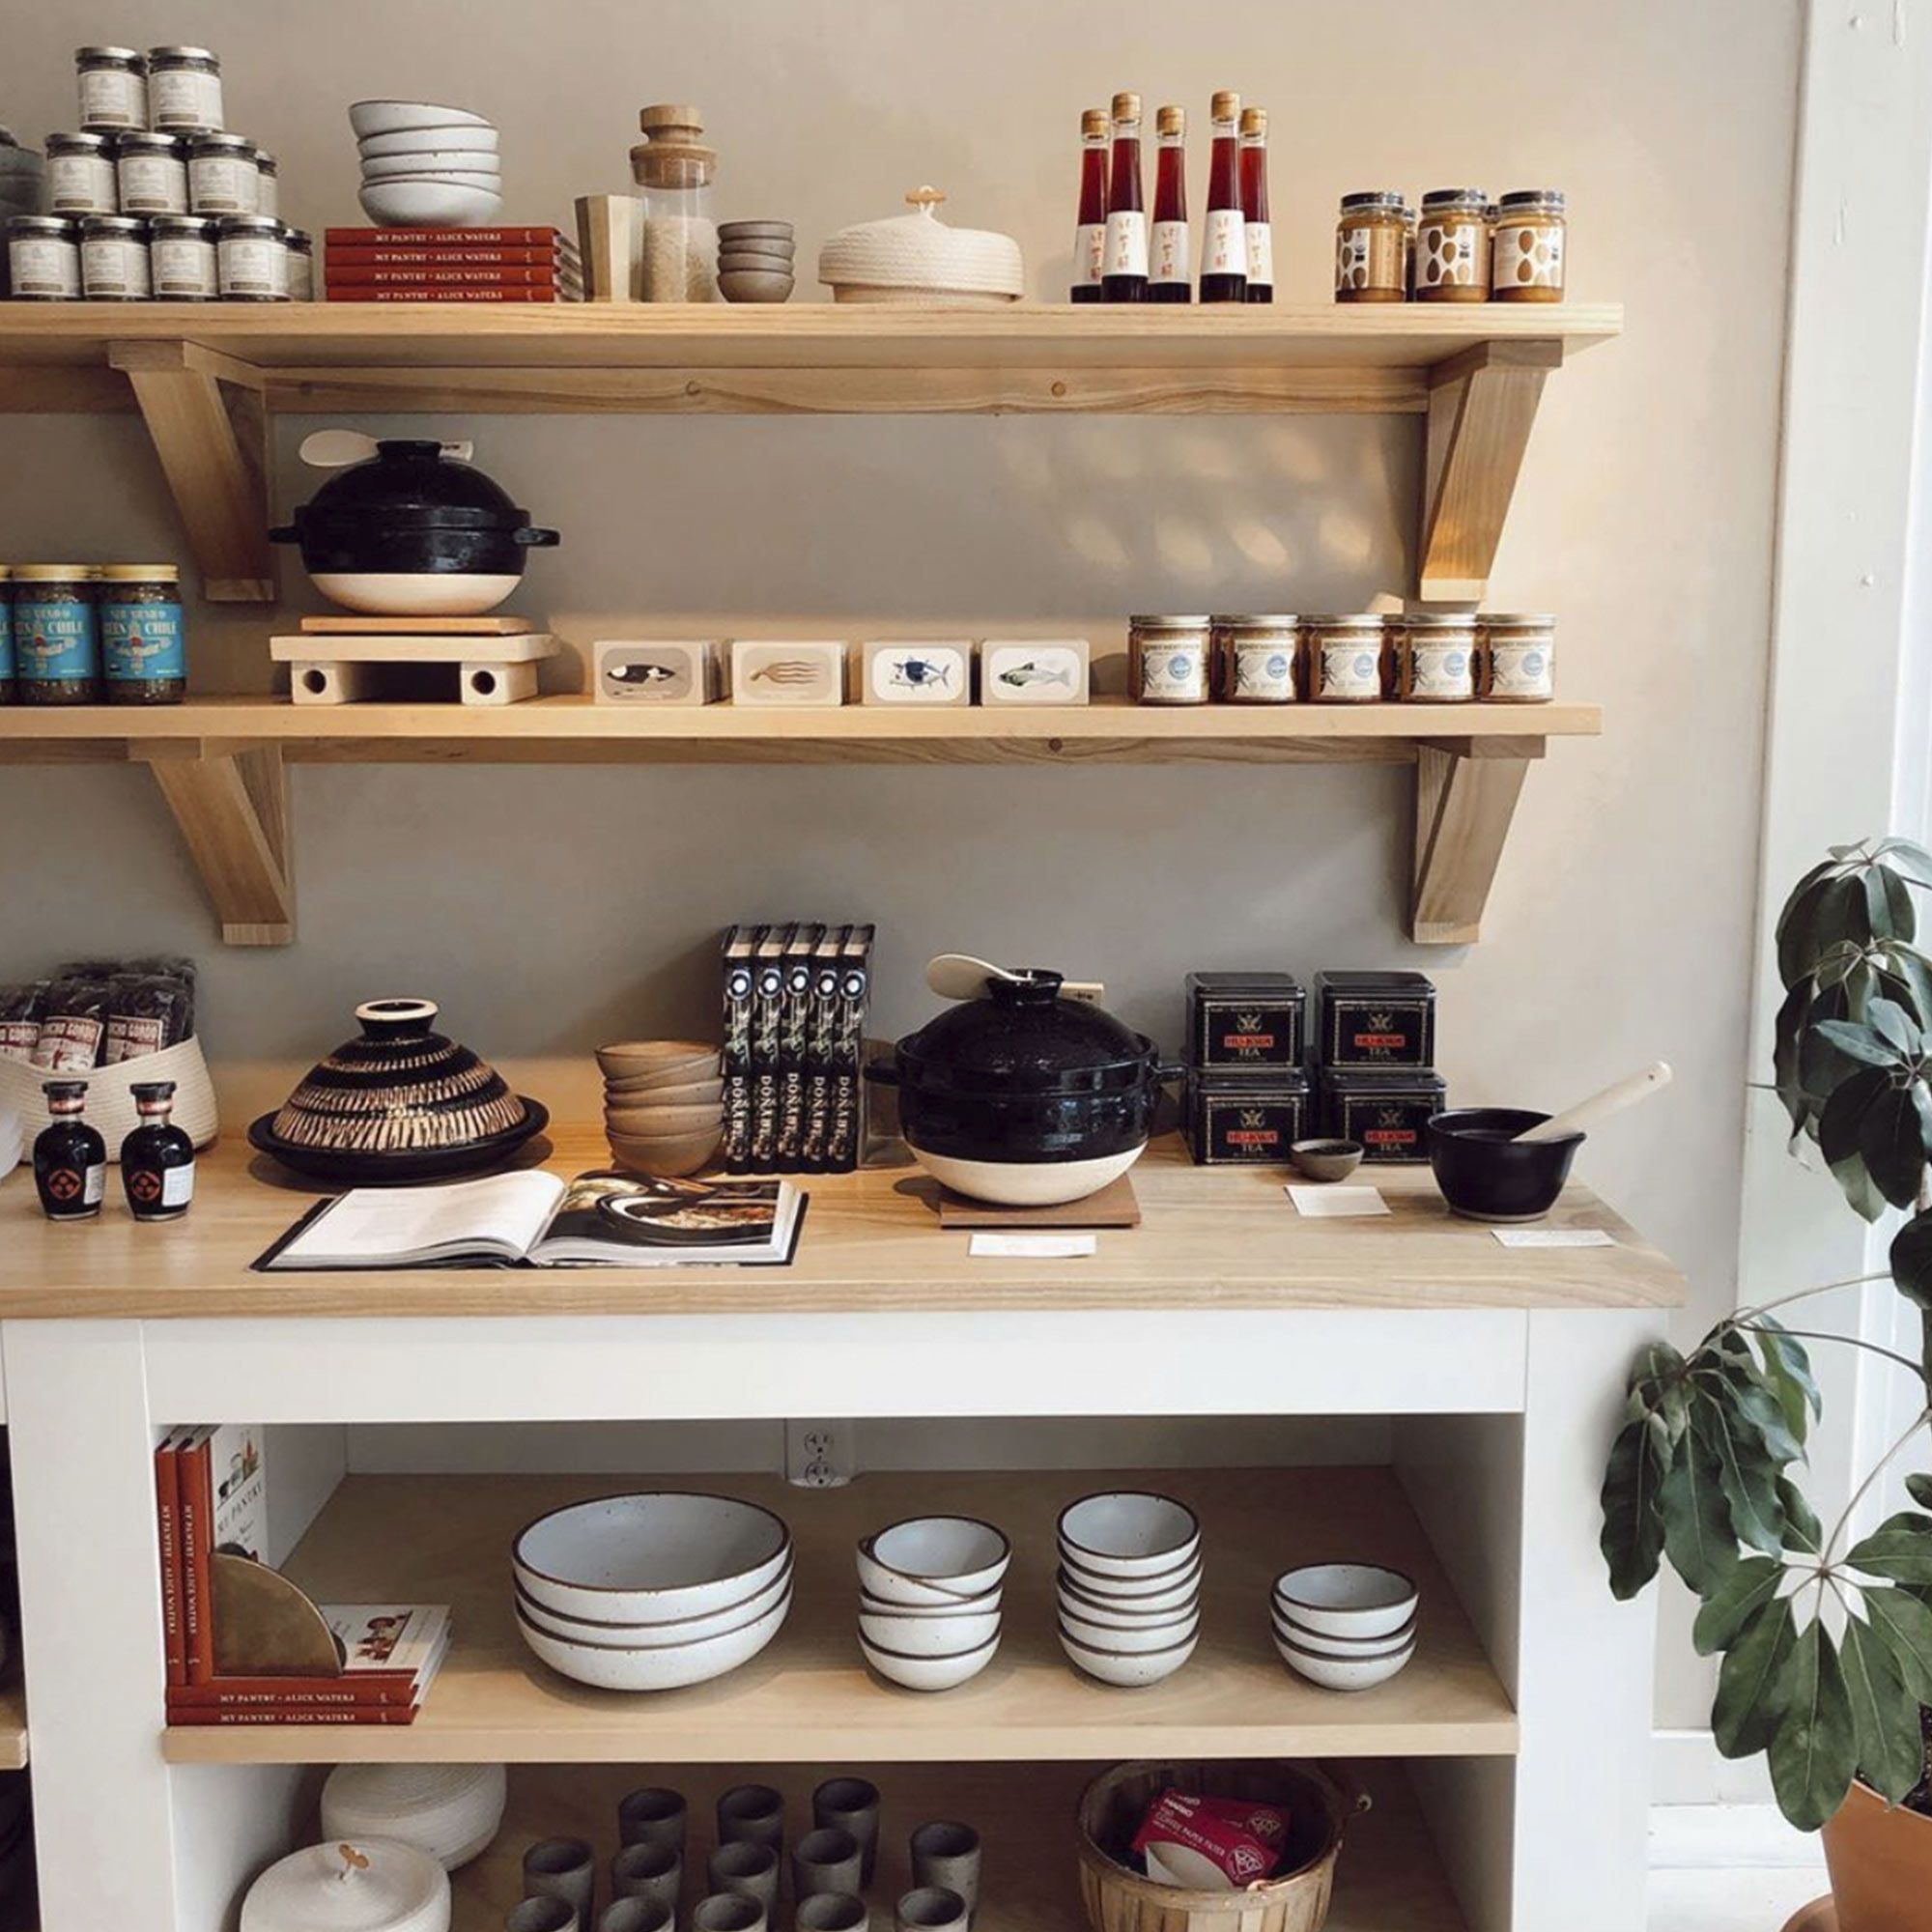 Shelves with pottery and cookware